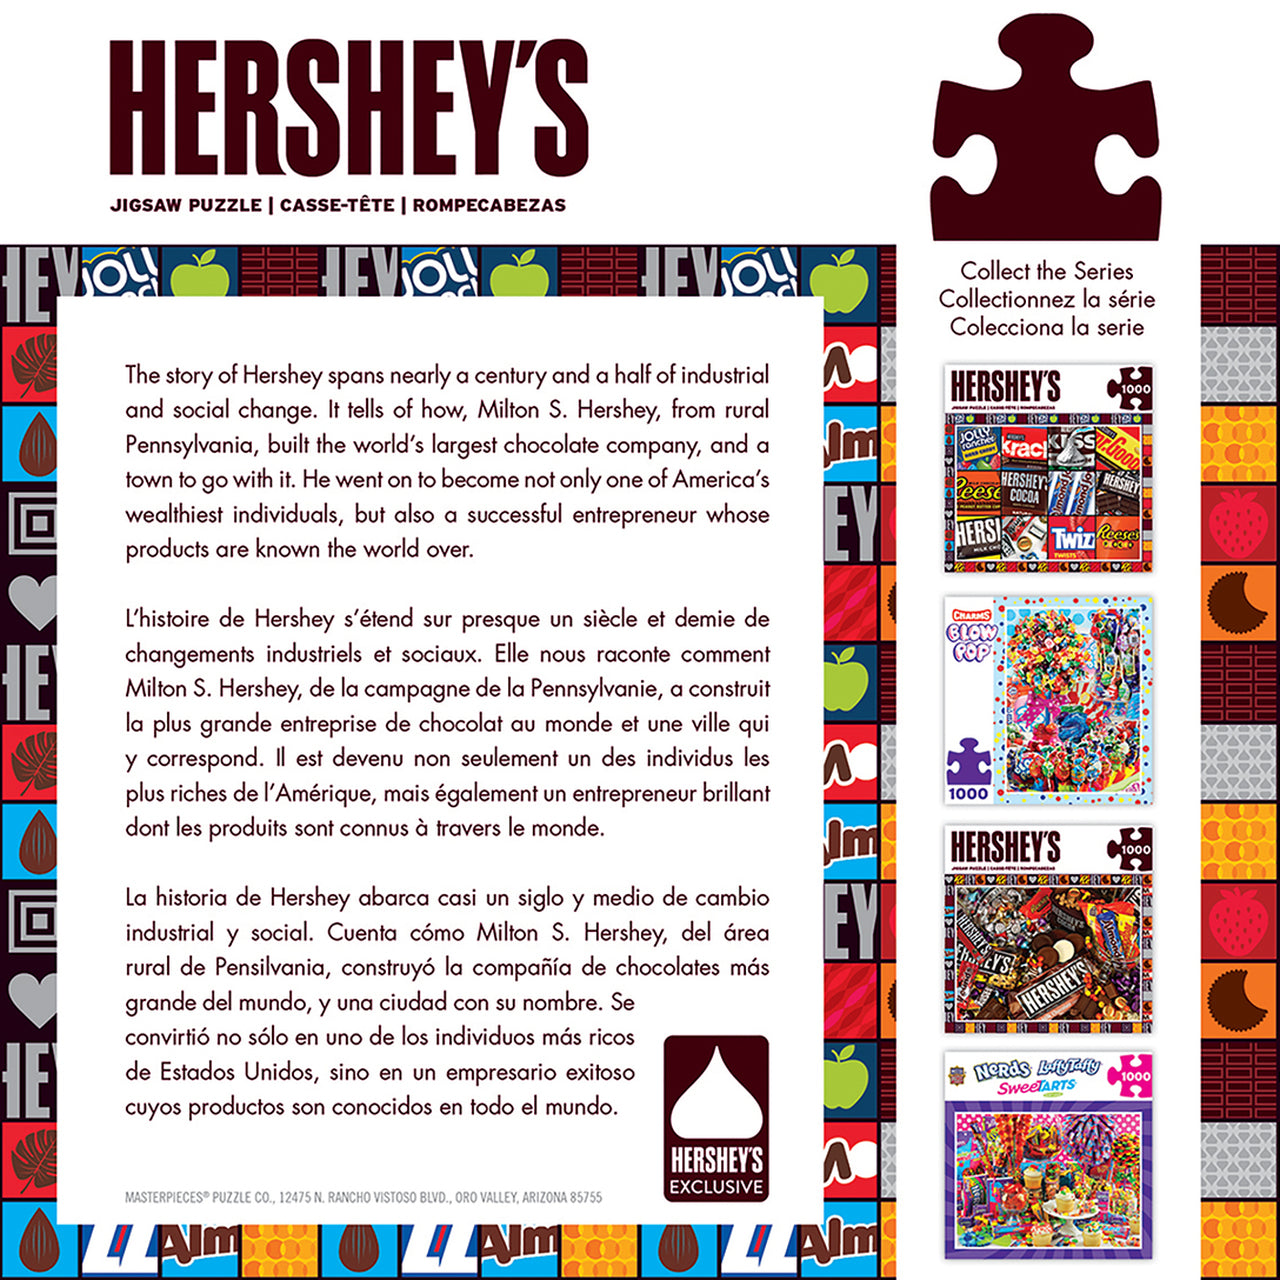 Hershey's Moments - Chocolate Collage 1000 Piece Jigsaw Puzzle by Masterpieces